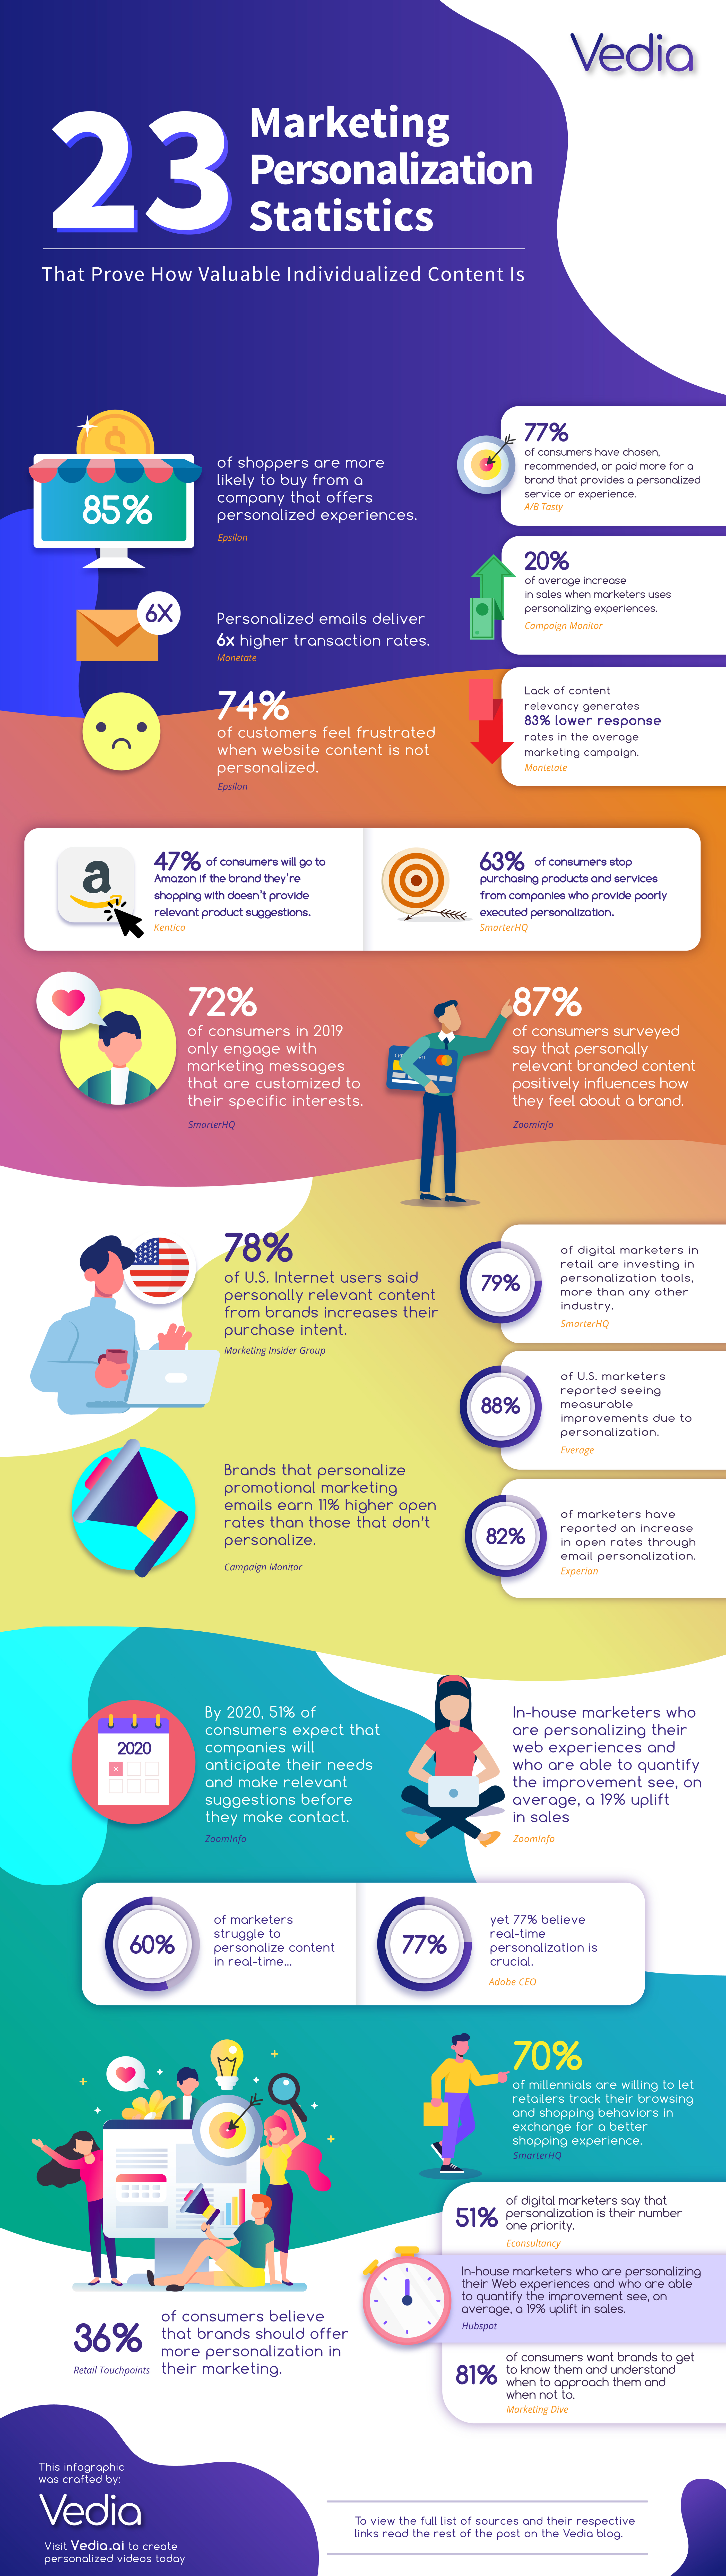 an infographic on individualized content and how consumers are interacting with it on the web. 